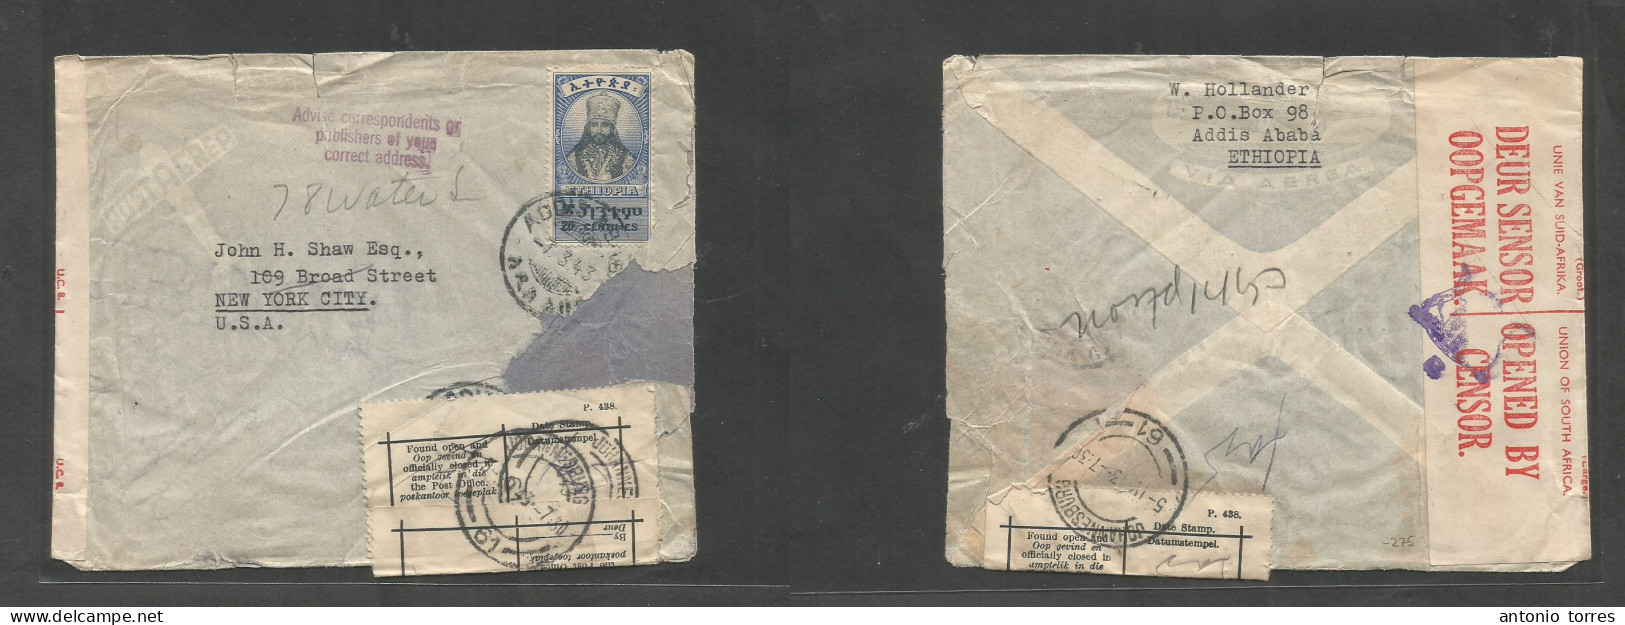 Ethiopia. 1943 (7 March) Addis Abeba - USA, NYC. Fkd Env 20c Rate + S. Africa Censor + Post Office Official Label Tied A - Etiopía